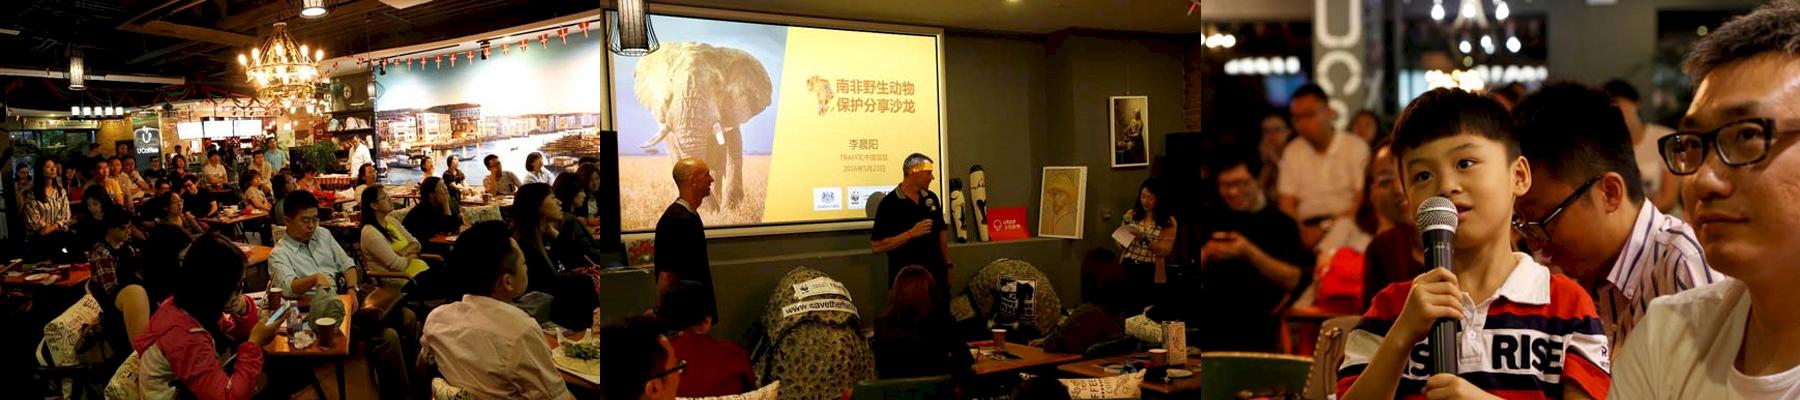 Participants in the tourism reception hosted by TRAFFIC, Li Chenyang introducing the “rhino marathon” runners from South Africa, The youngest participant asked “if poaching doesn’t stop, what will happen?” © TRAFFIC